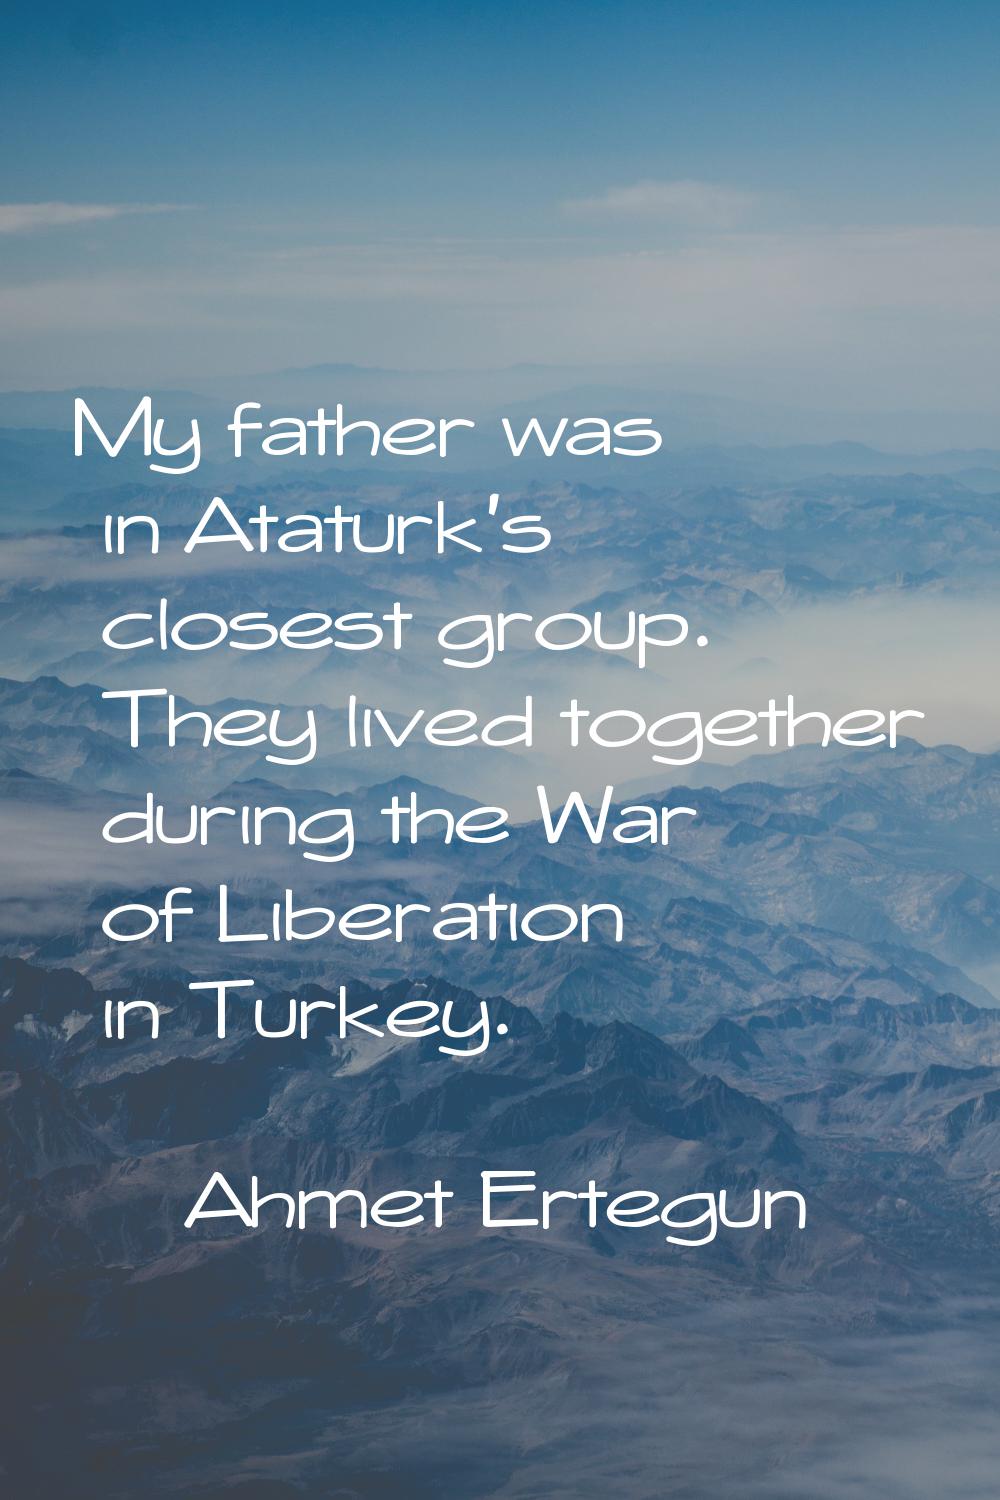 My father was in Ataturk's closest group. They lived together during the War of Liberation in Turke